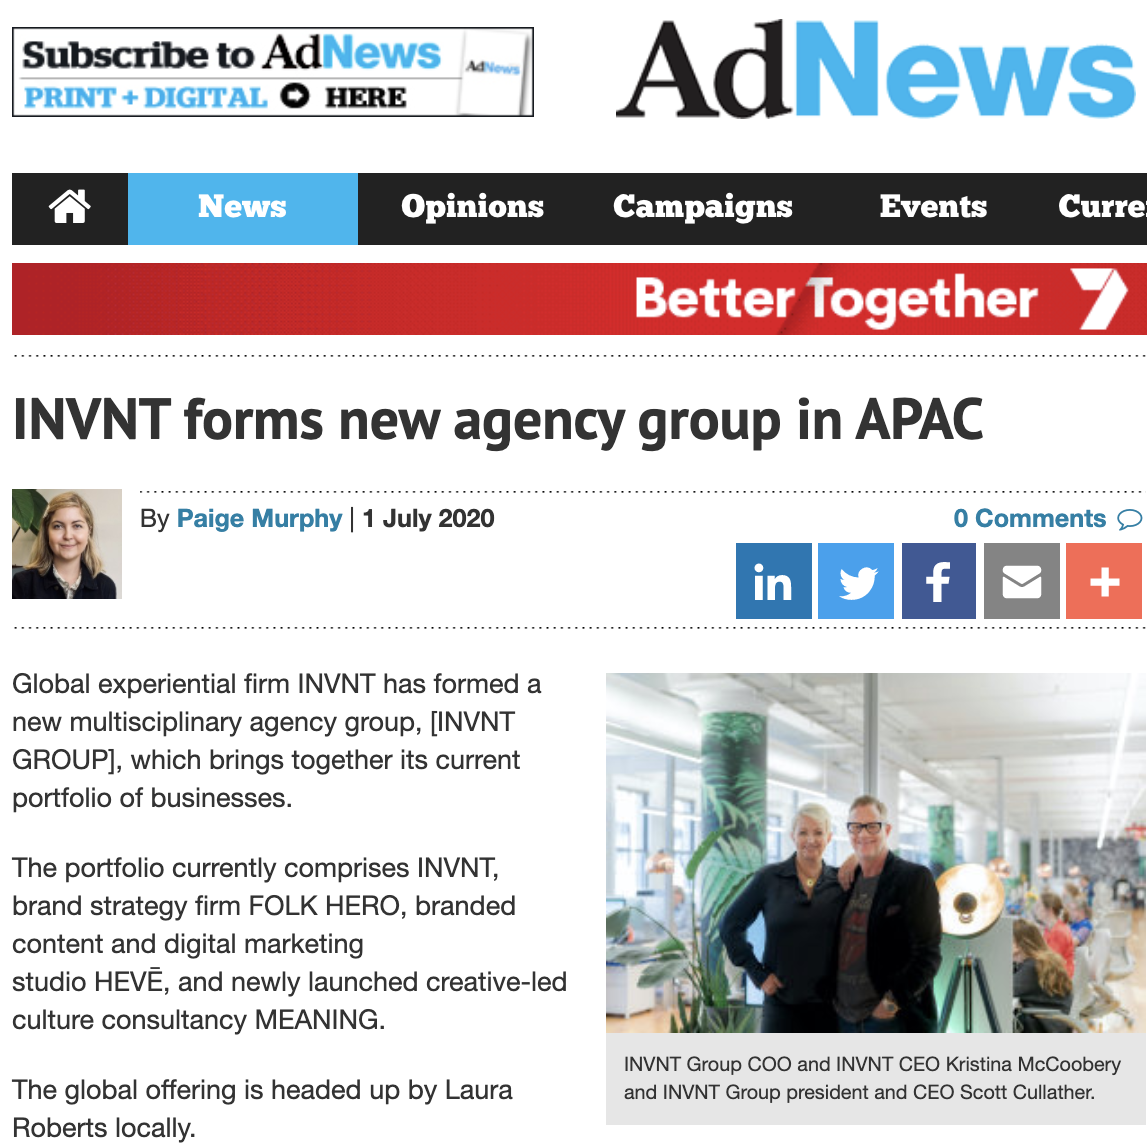 INVNT forms new agency group in APAC